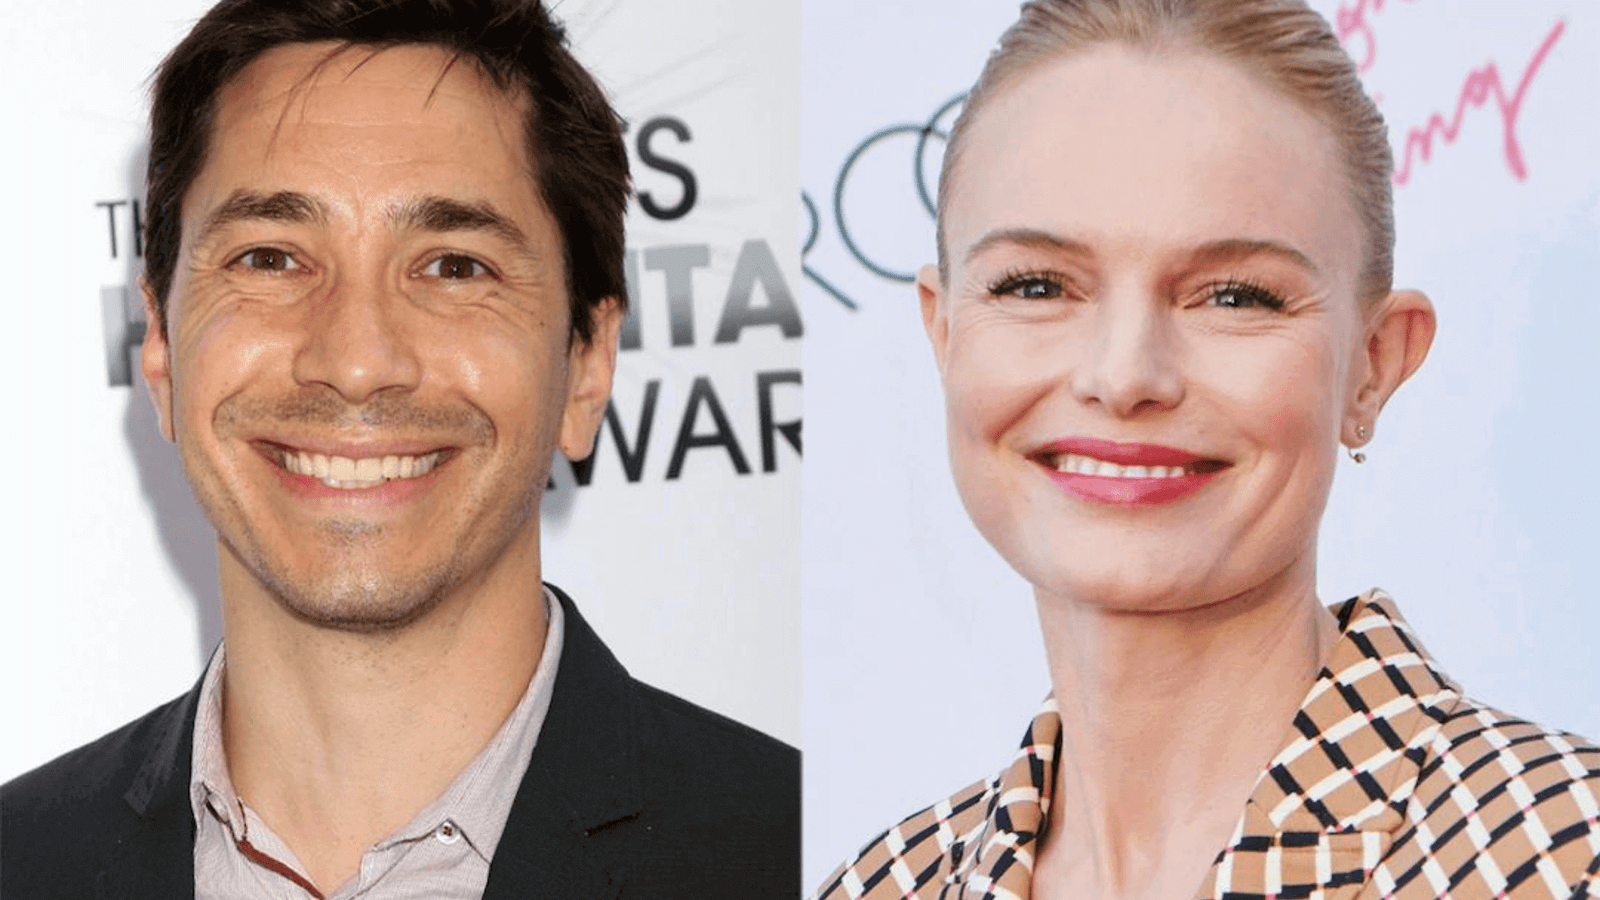 What's Going On Between Justin Long And Kate Bosworth